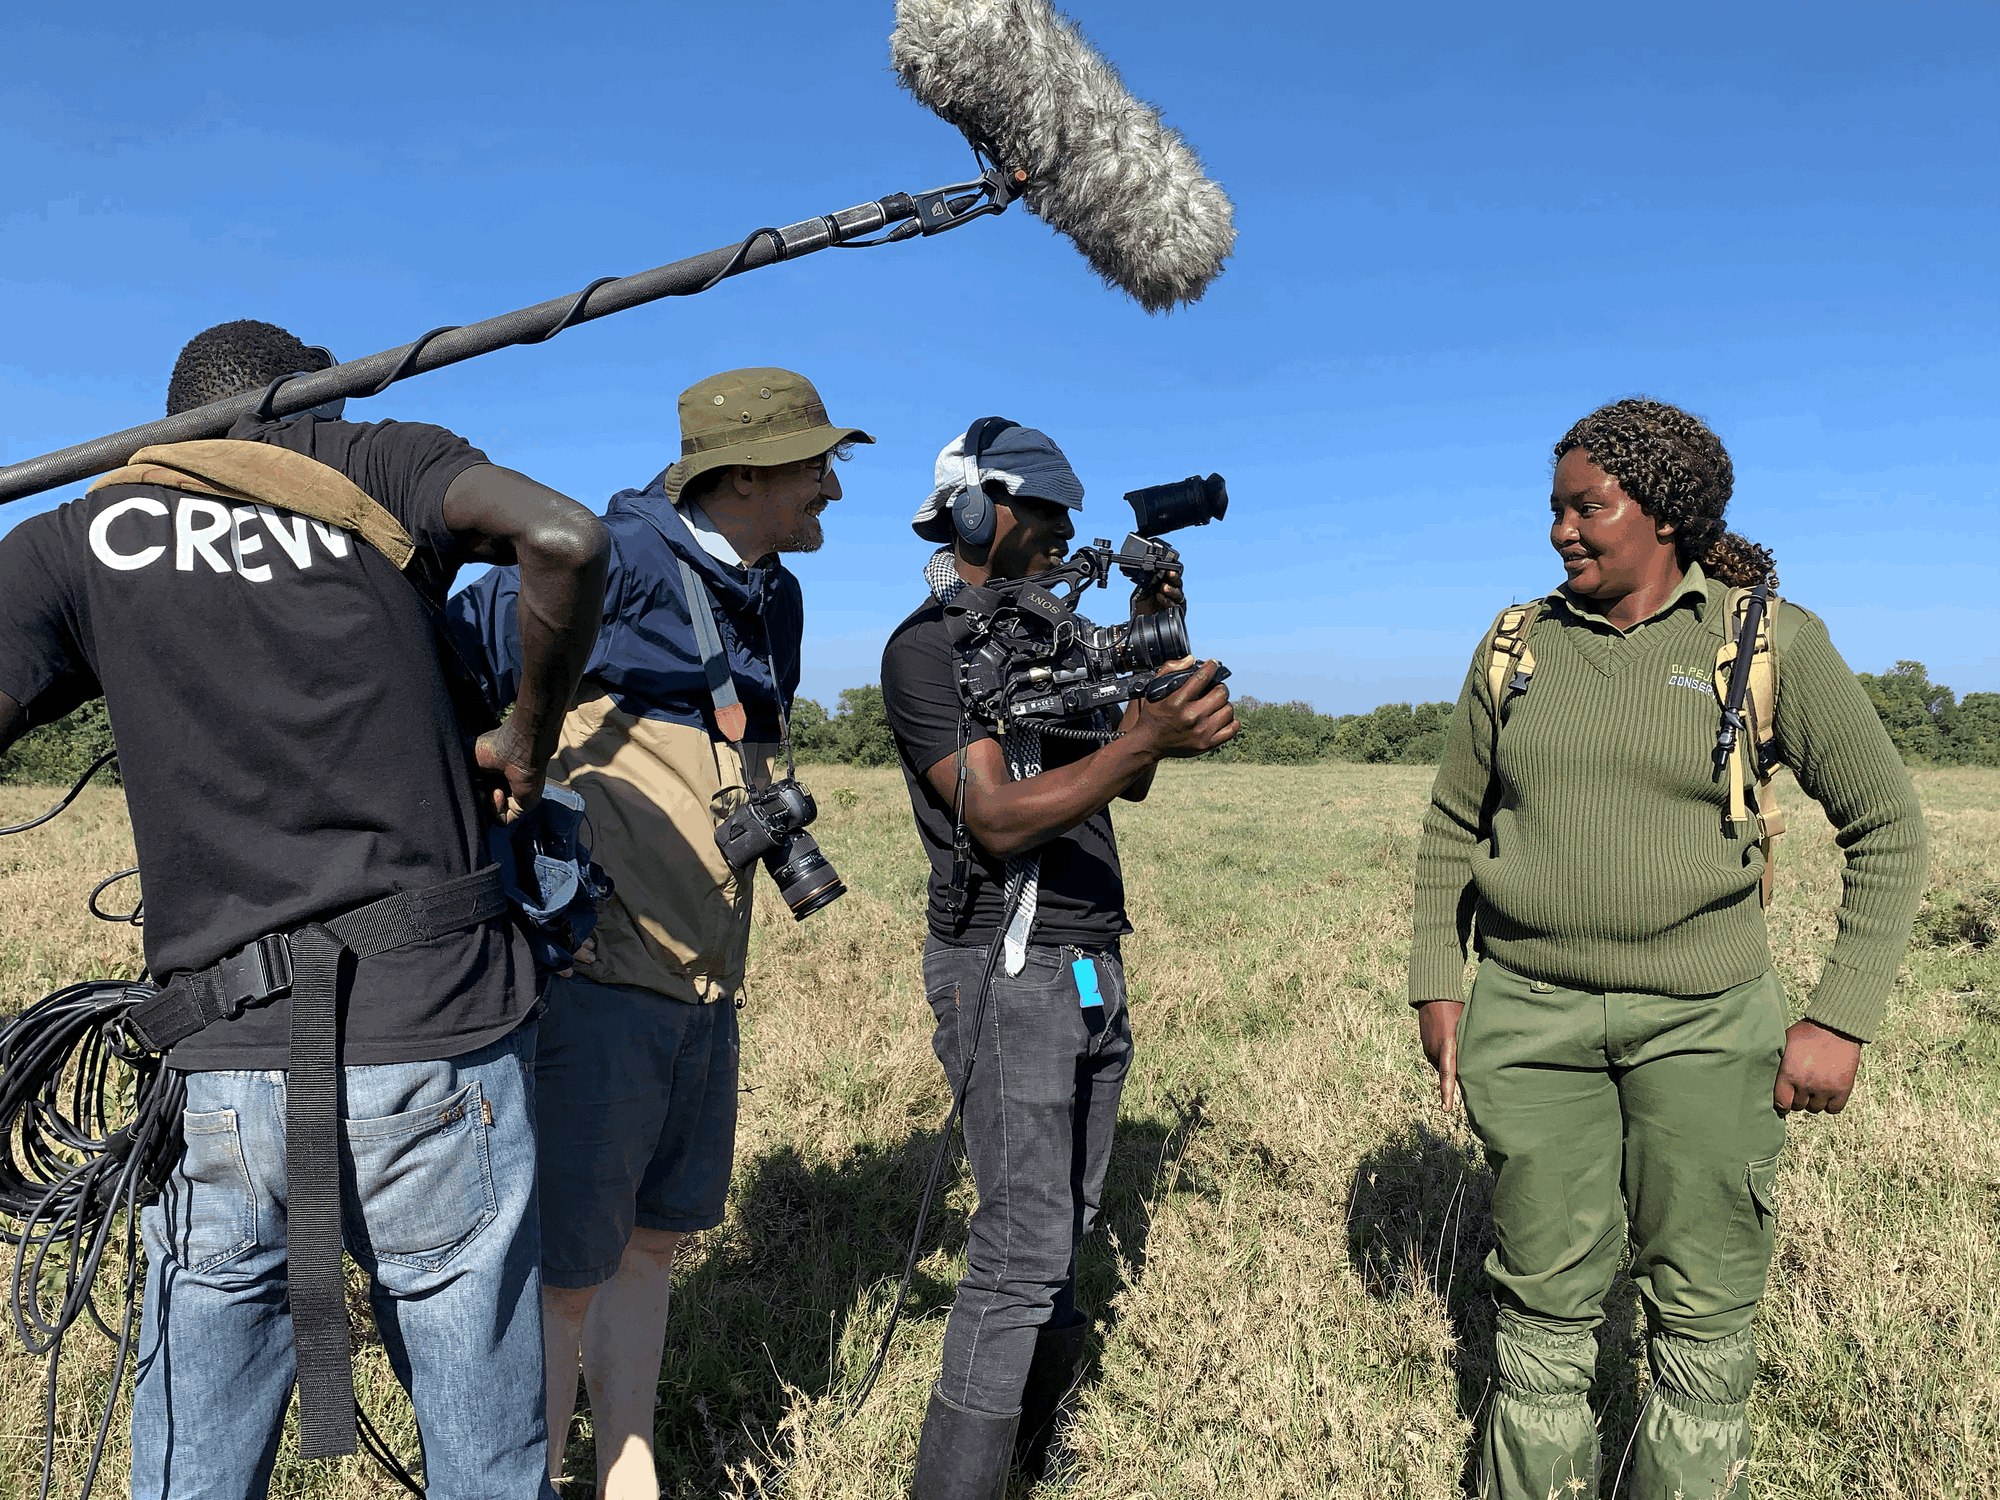 African camera crew filming a ranger in the savanna